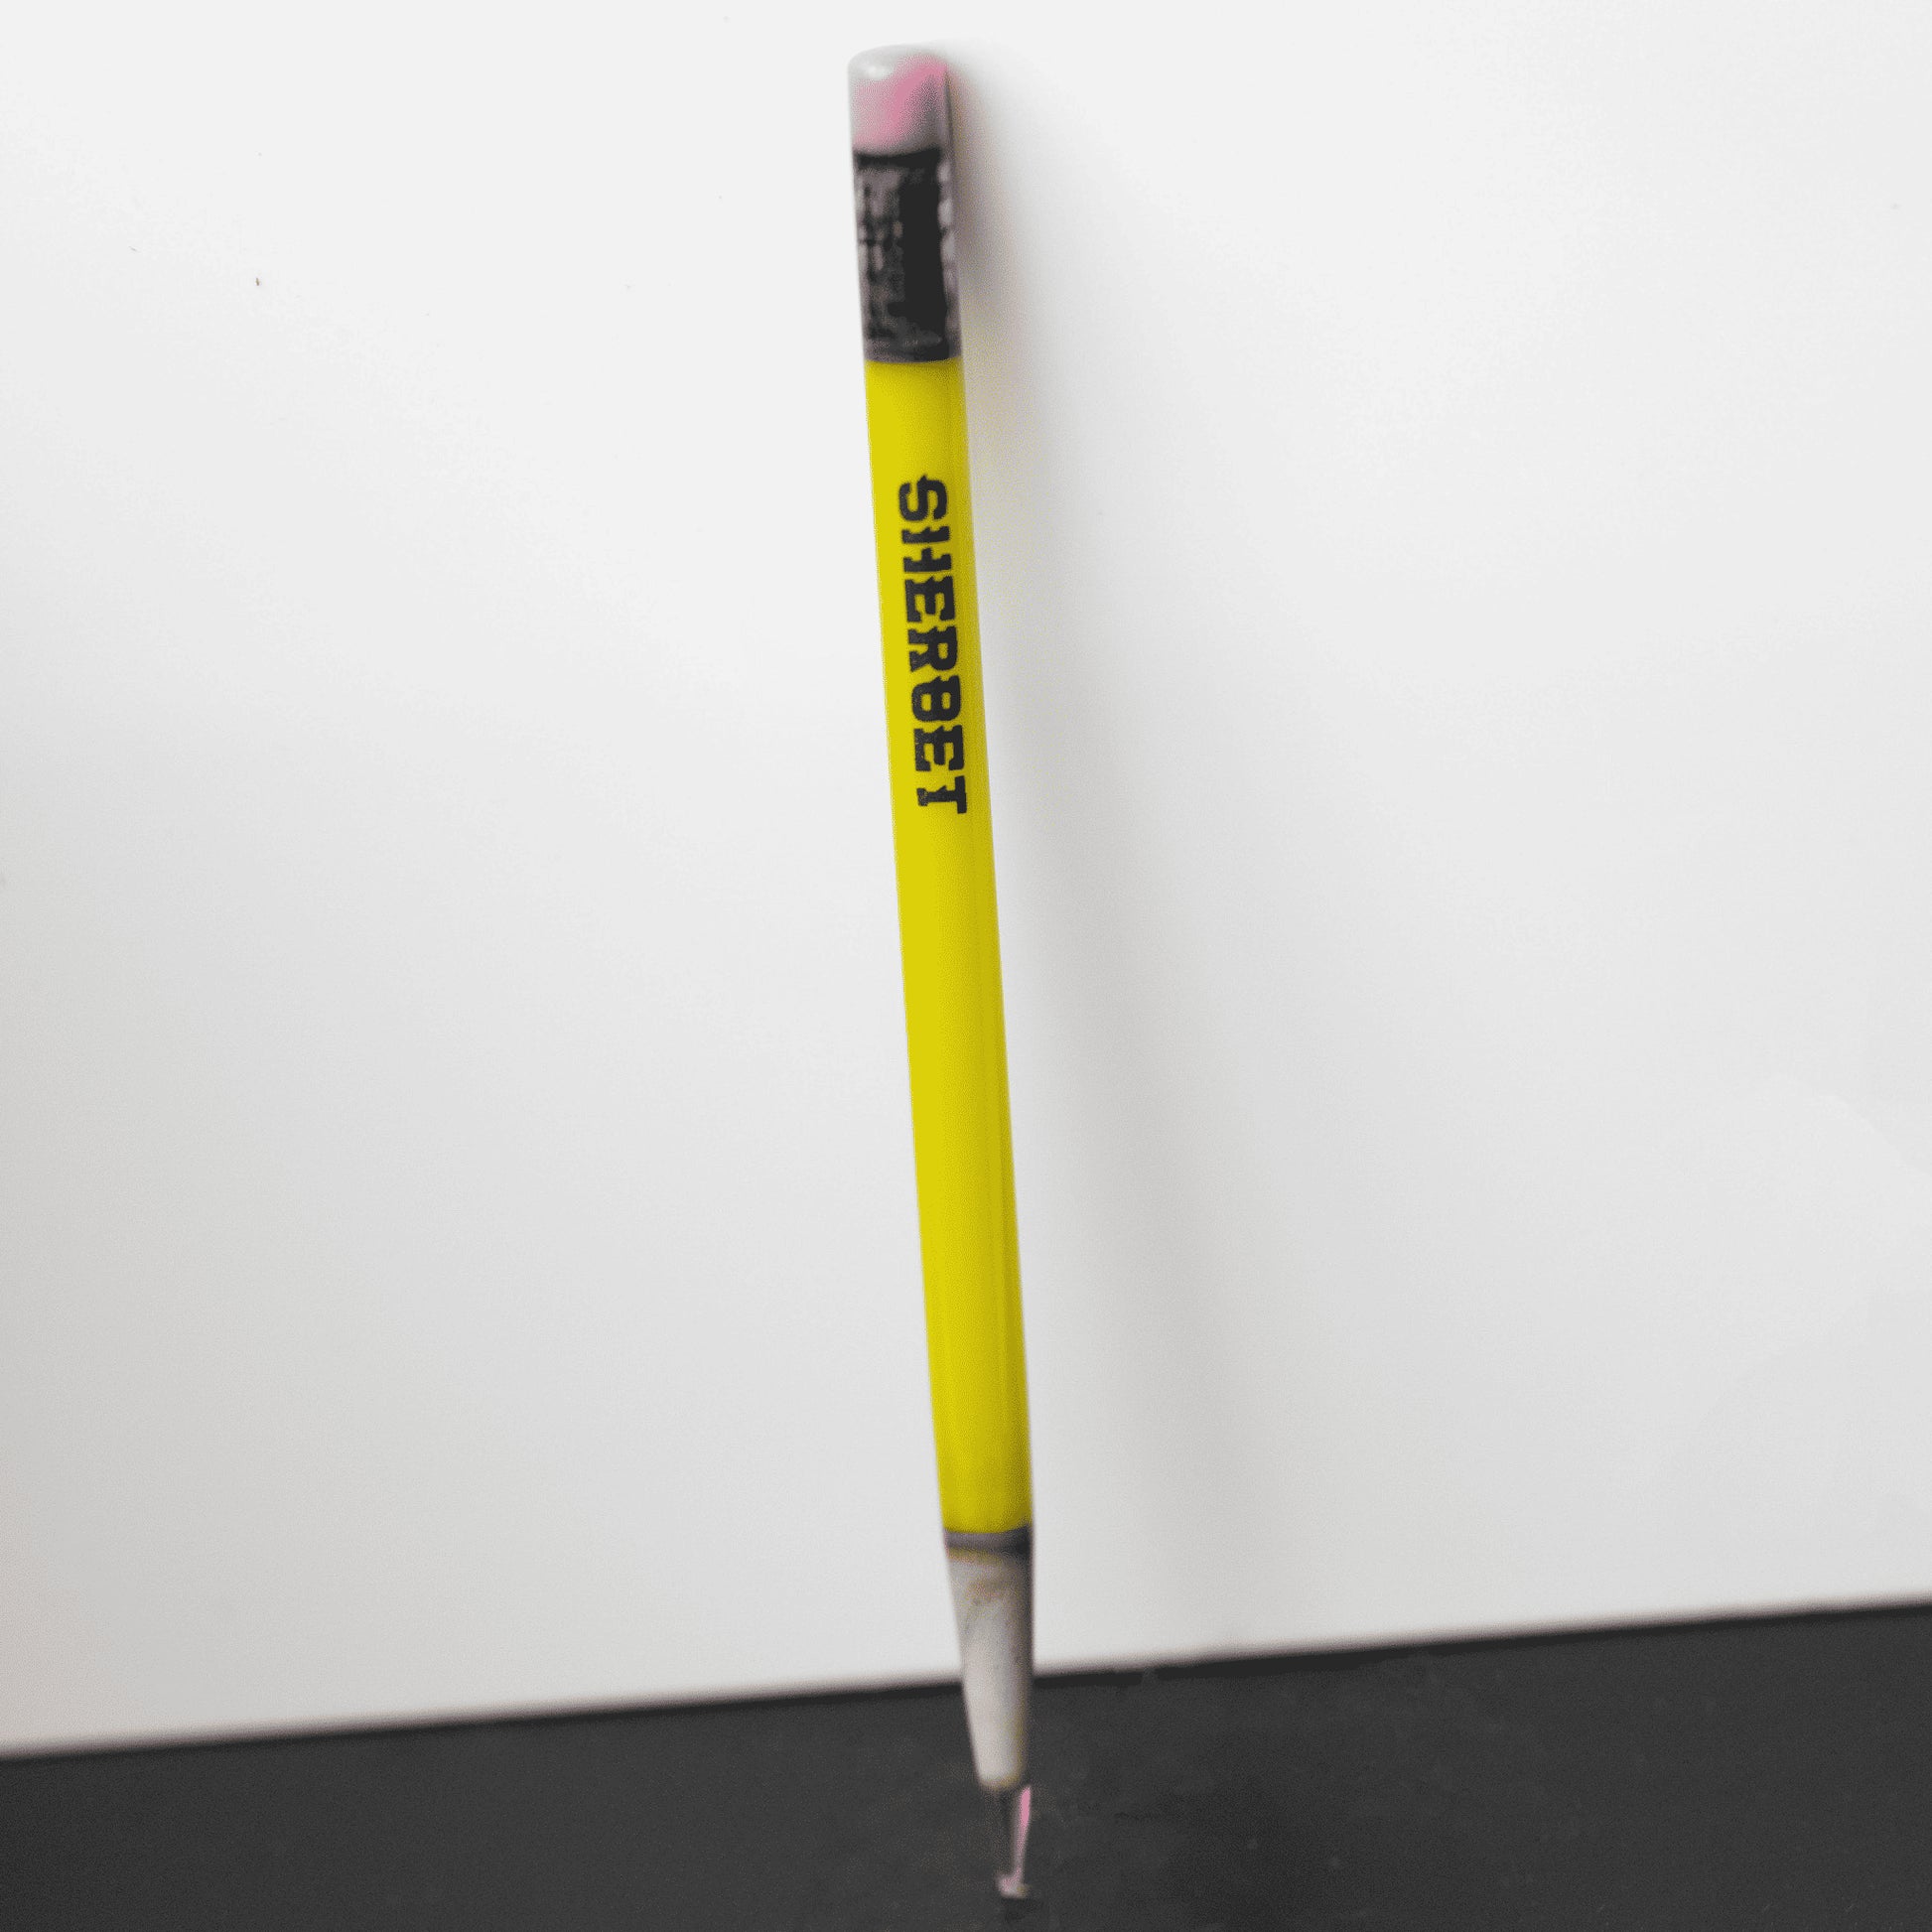 exquisite art piece - Labeled Pencil (D) by Sherbet Glass